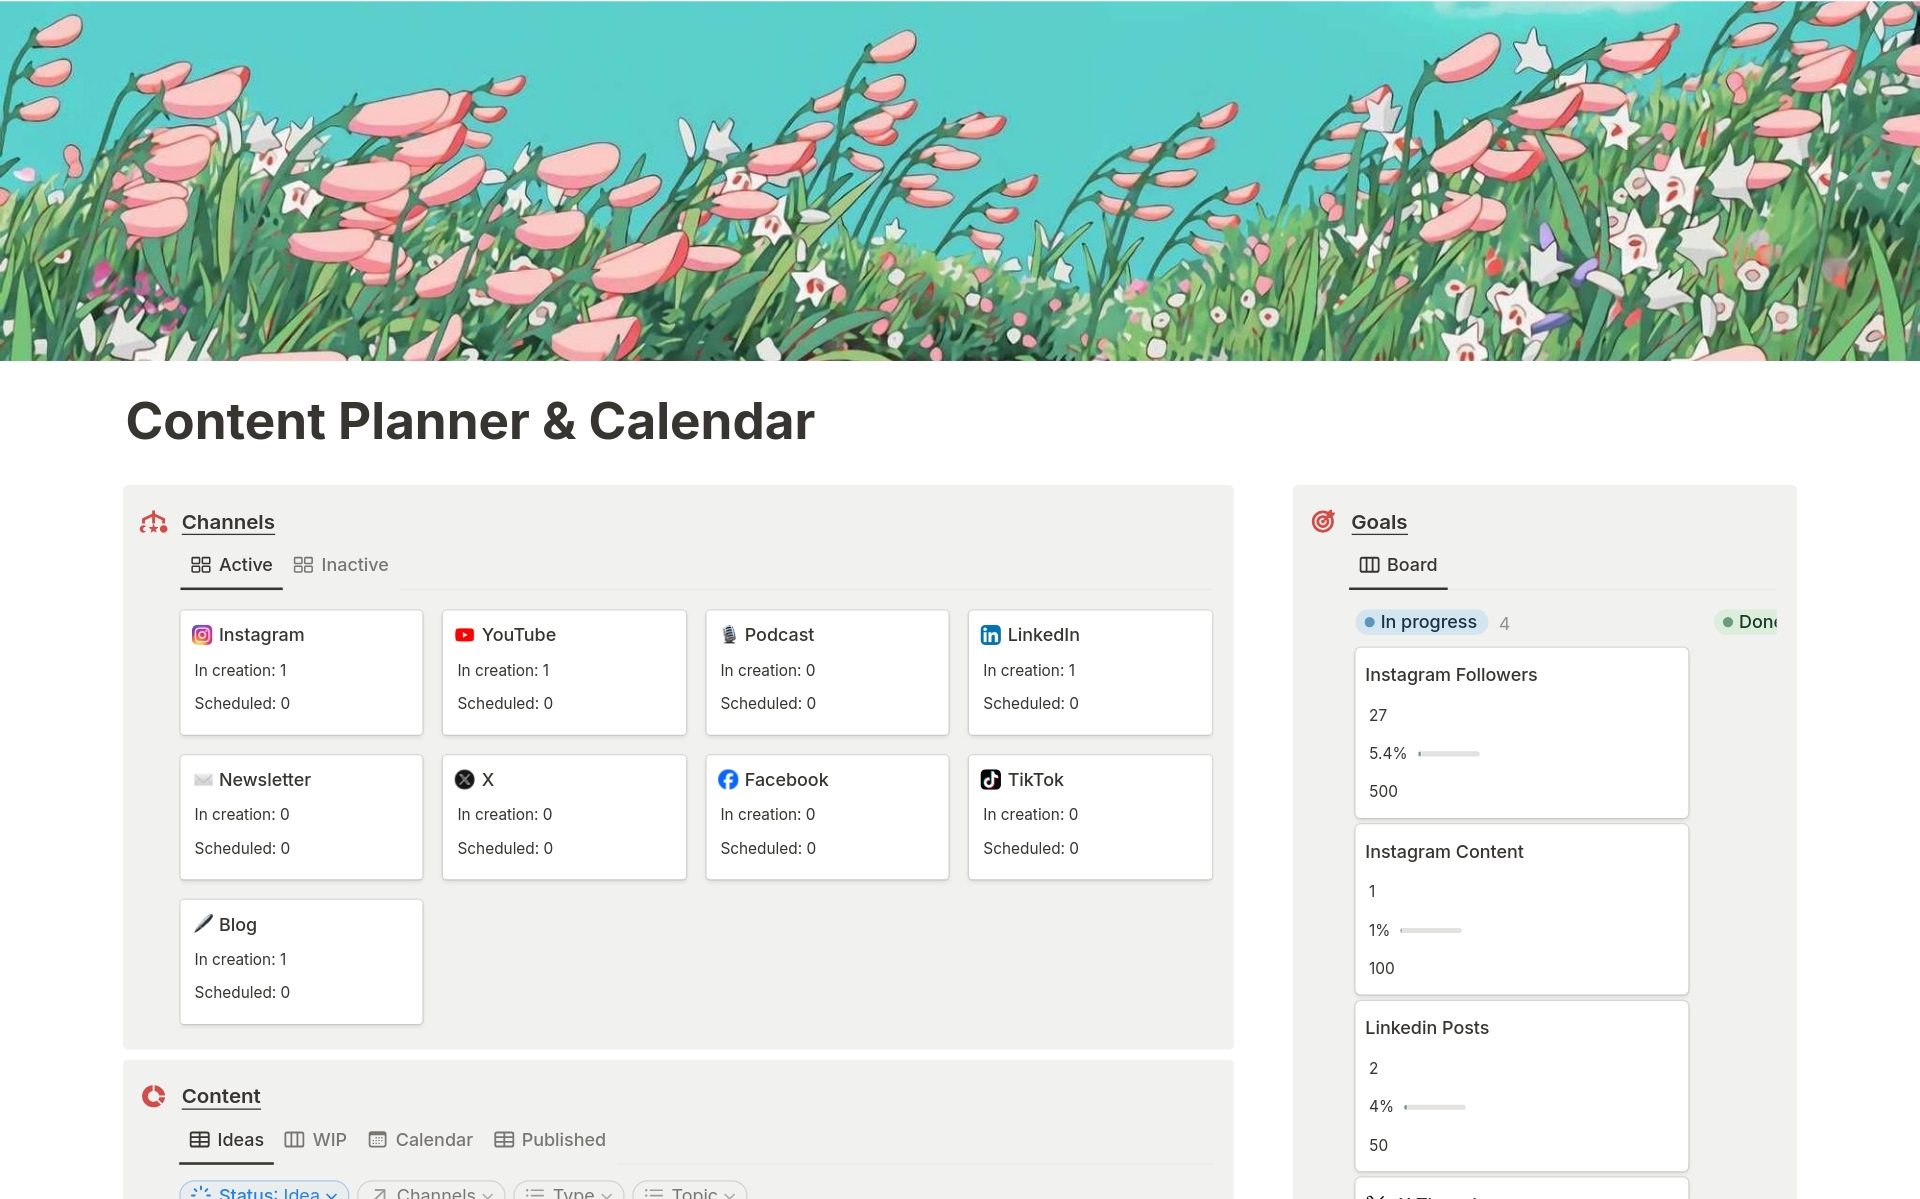 Tired of juggling content across platforms? Introducing the Ultimate Content Planner & Calendar - your one-stop shop to plan, manage, and dominate content creation!  Discover powerful features to skyrocket your content game and conquer the world, one post at a time.